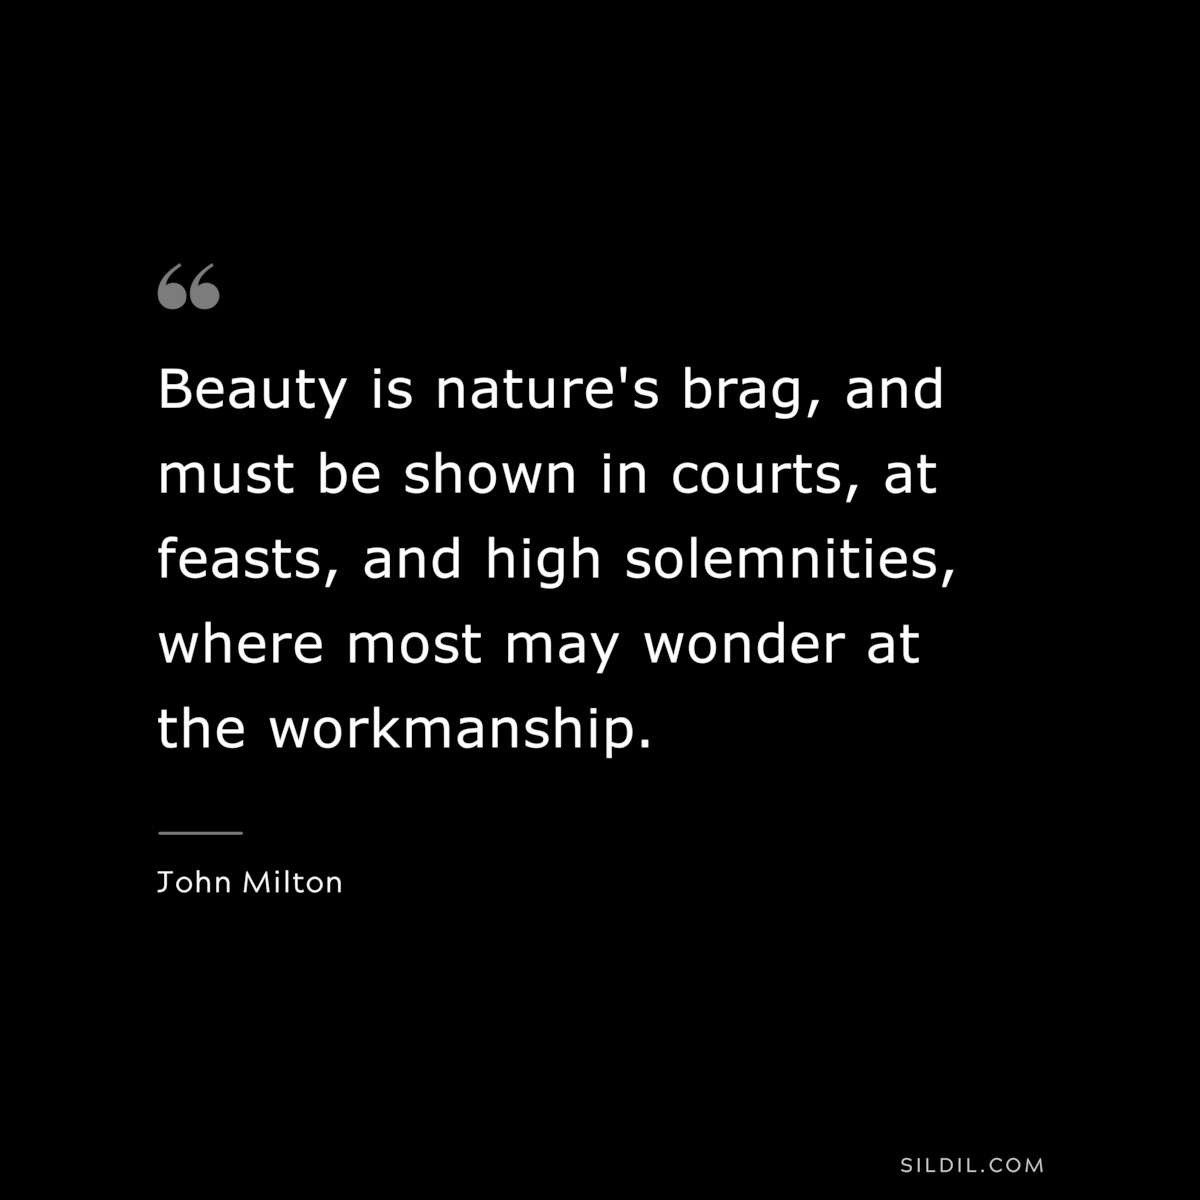 Beauty is nature's brag, and must be shown in courts, at feasts, and high solemnities, where most may wonder at the workmanship. ― John Milton